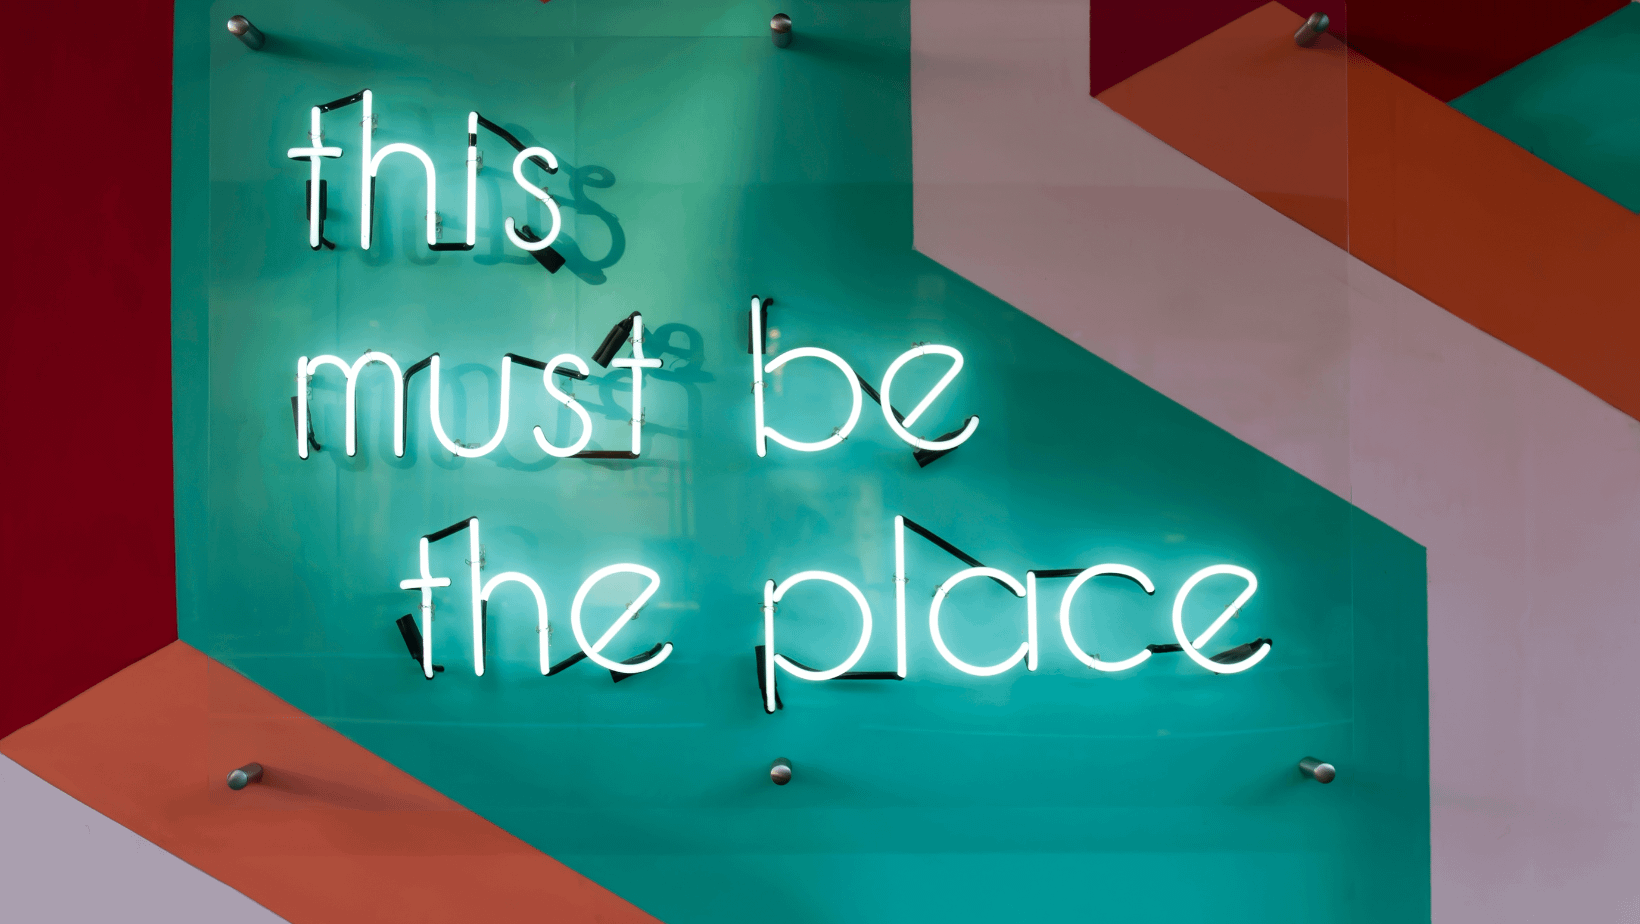 designer wall with neon sign "this must be the place"